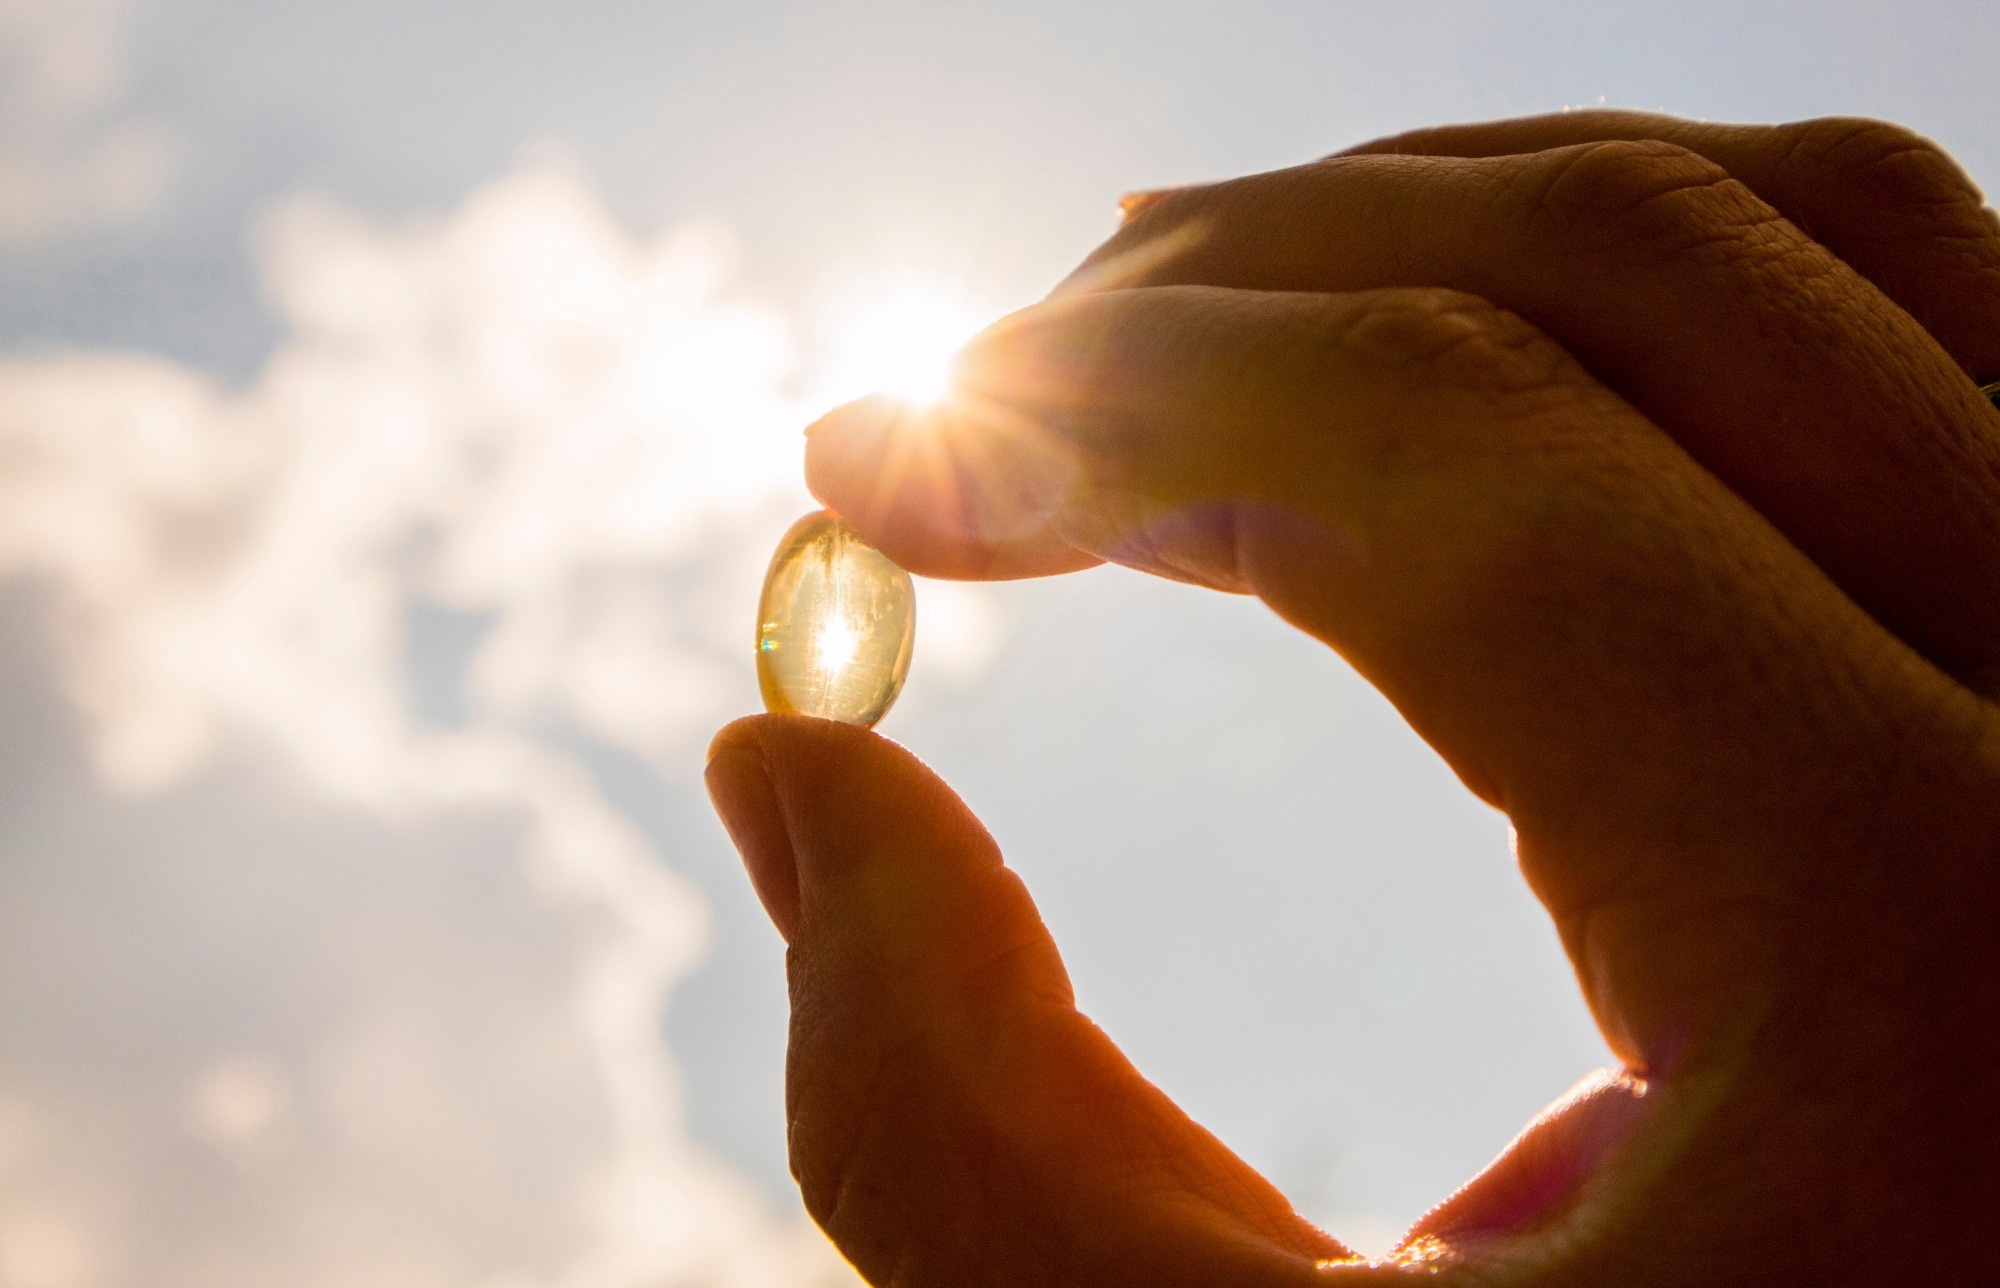 Study: Preventive Vitamin D Supplementation and Risk for COVID-19 Infection: A Systematic Review and Meta-Analysis. Image Credit: FotoHelin/Shutterstock.com